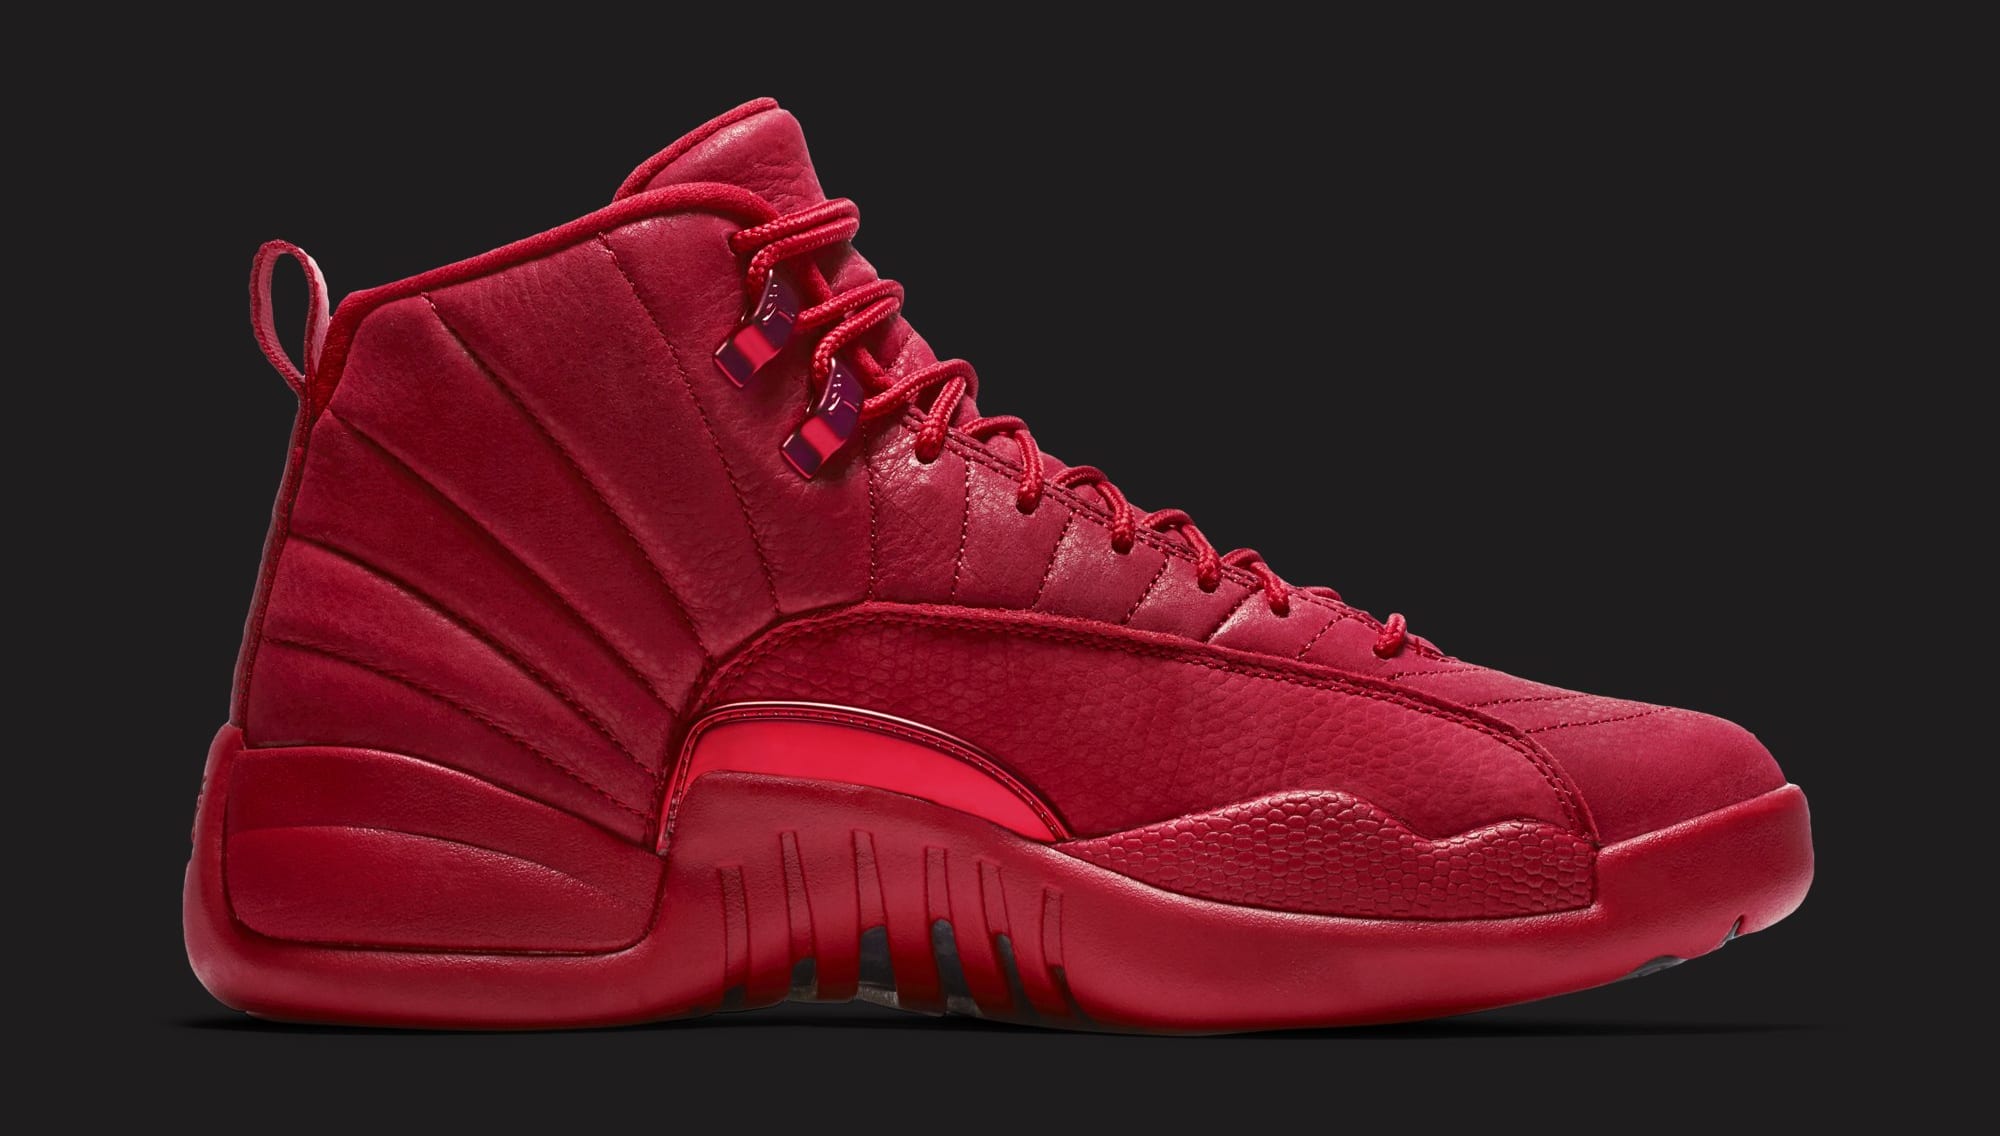 Air Jordan 12 Gym Red/Gym Red-Black 130690-601 University Blue/Metallic  Gold-Black 130690-430 Release Date | Sole Collector